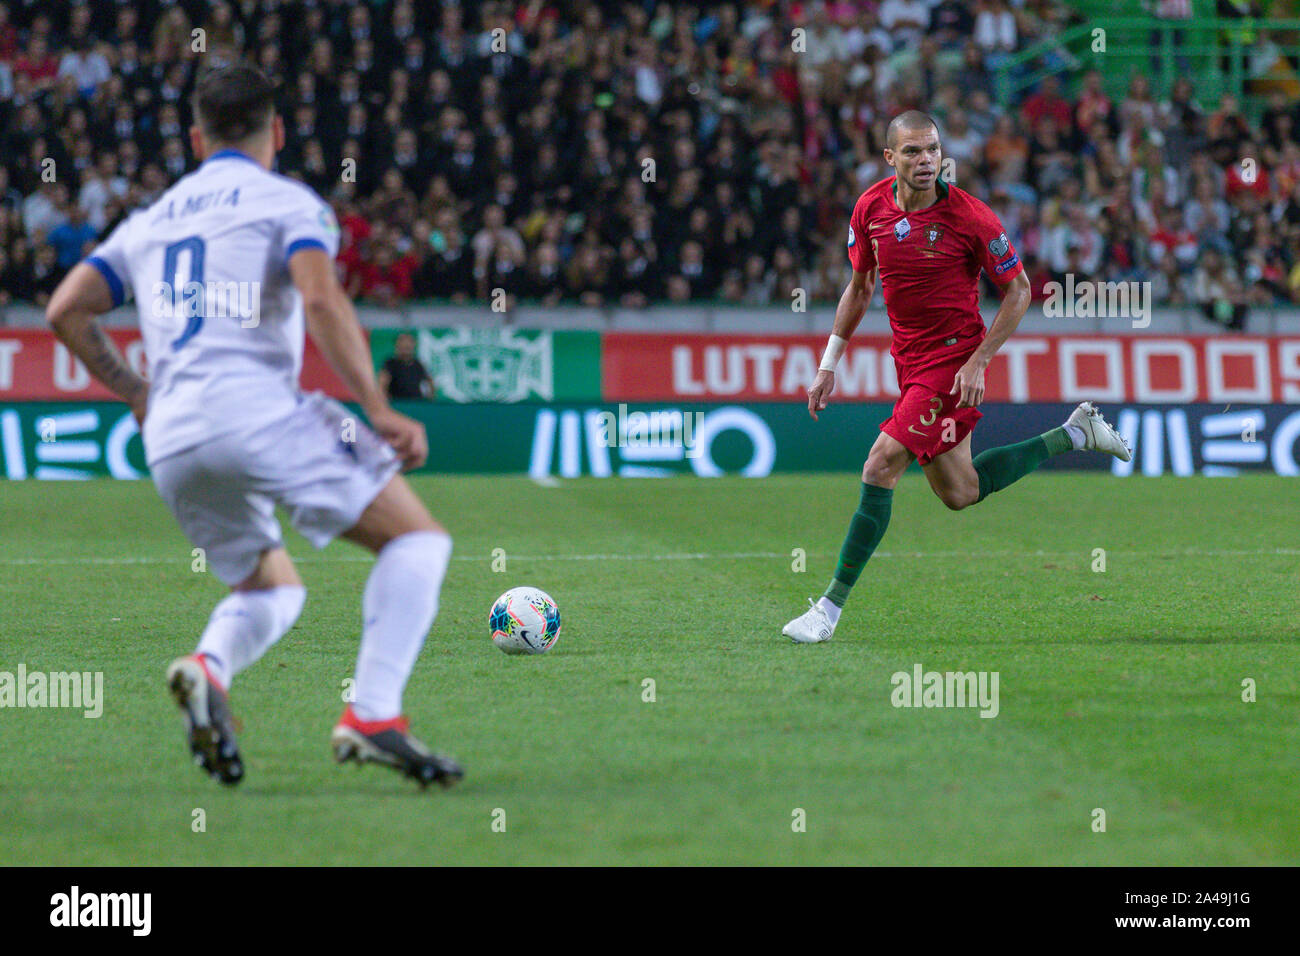 October 11, 2019. Lisbon, Portugal. Portugal's and Porto defender Pepe (3) during the European Championship 2020 Qualifying Round between Portugal and Luxembourg © Alexandre de Sousa/Alamy Live News Stock Photo